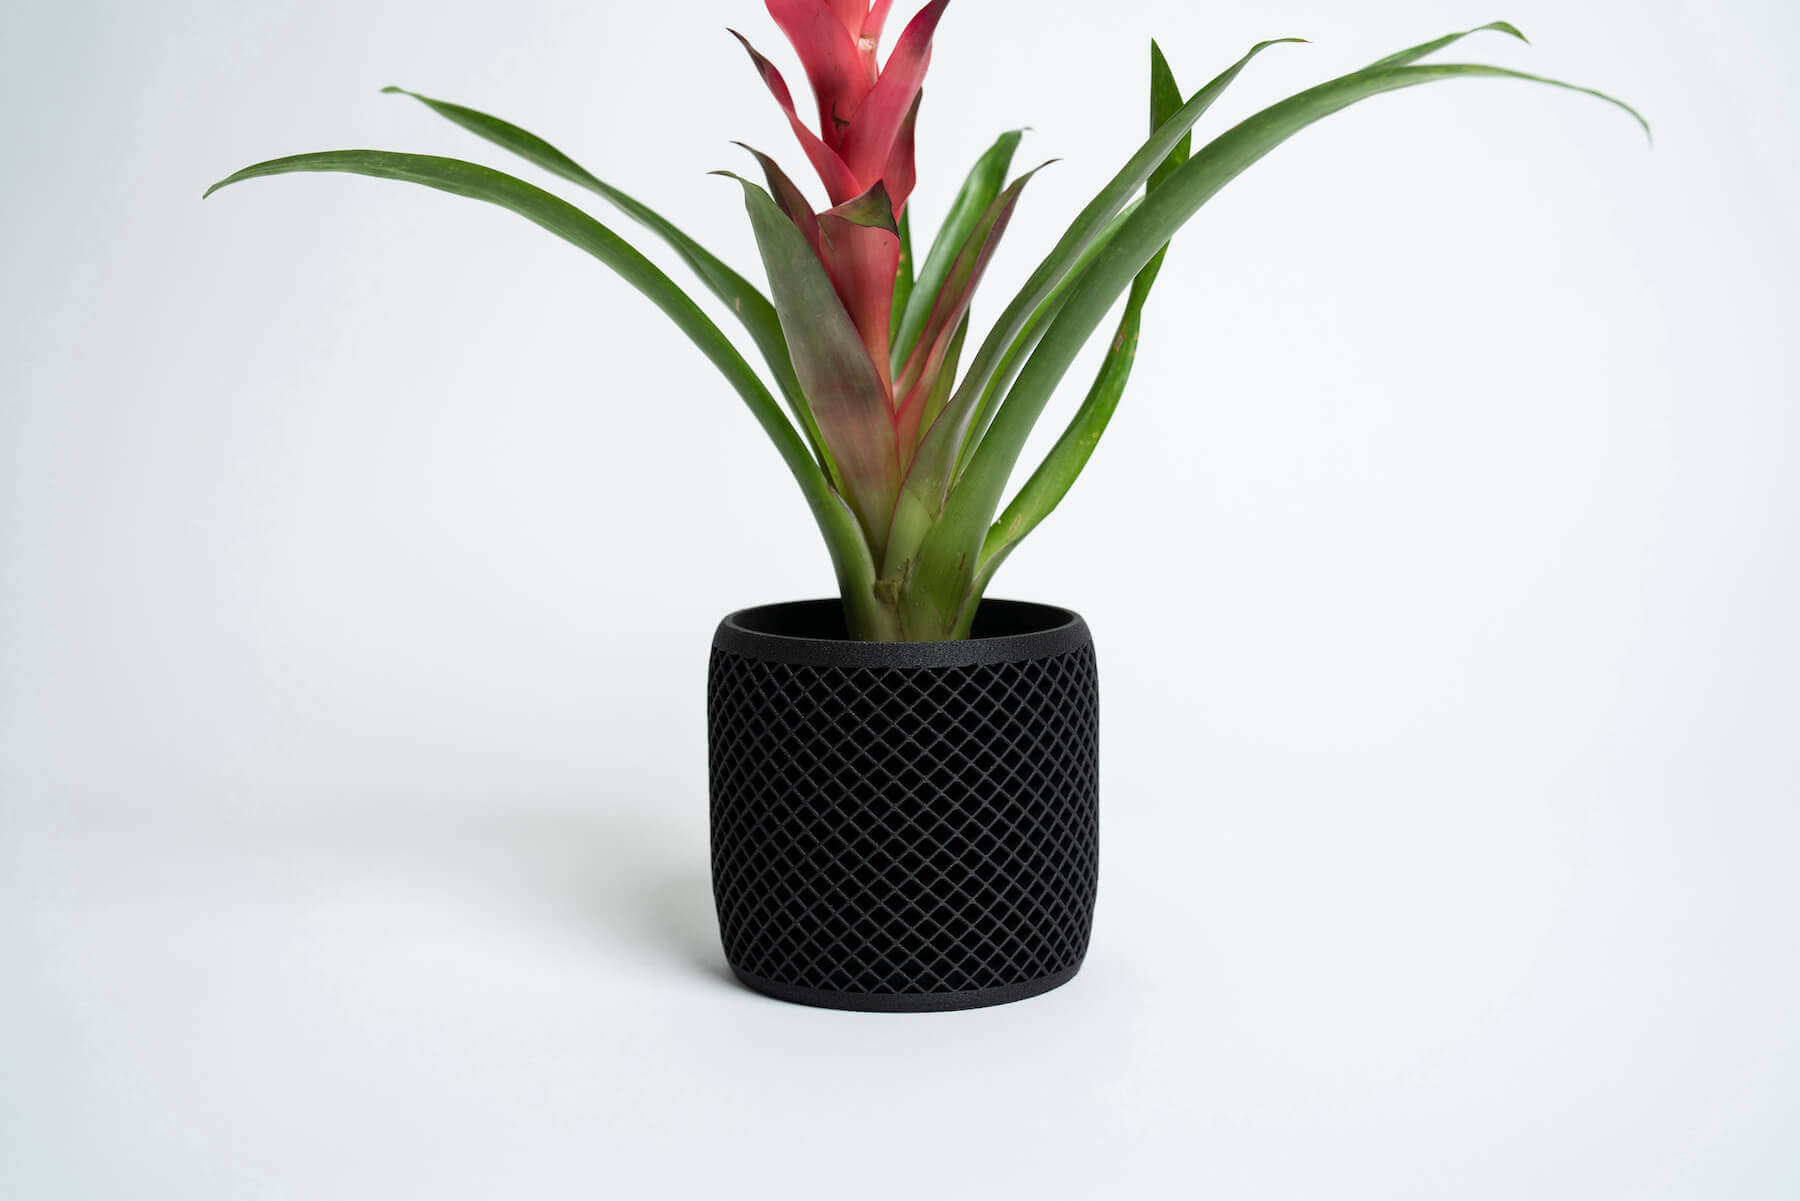 VISION geometric black planter pot with a red stalk.